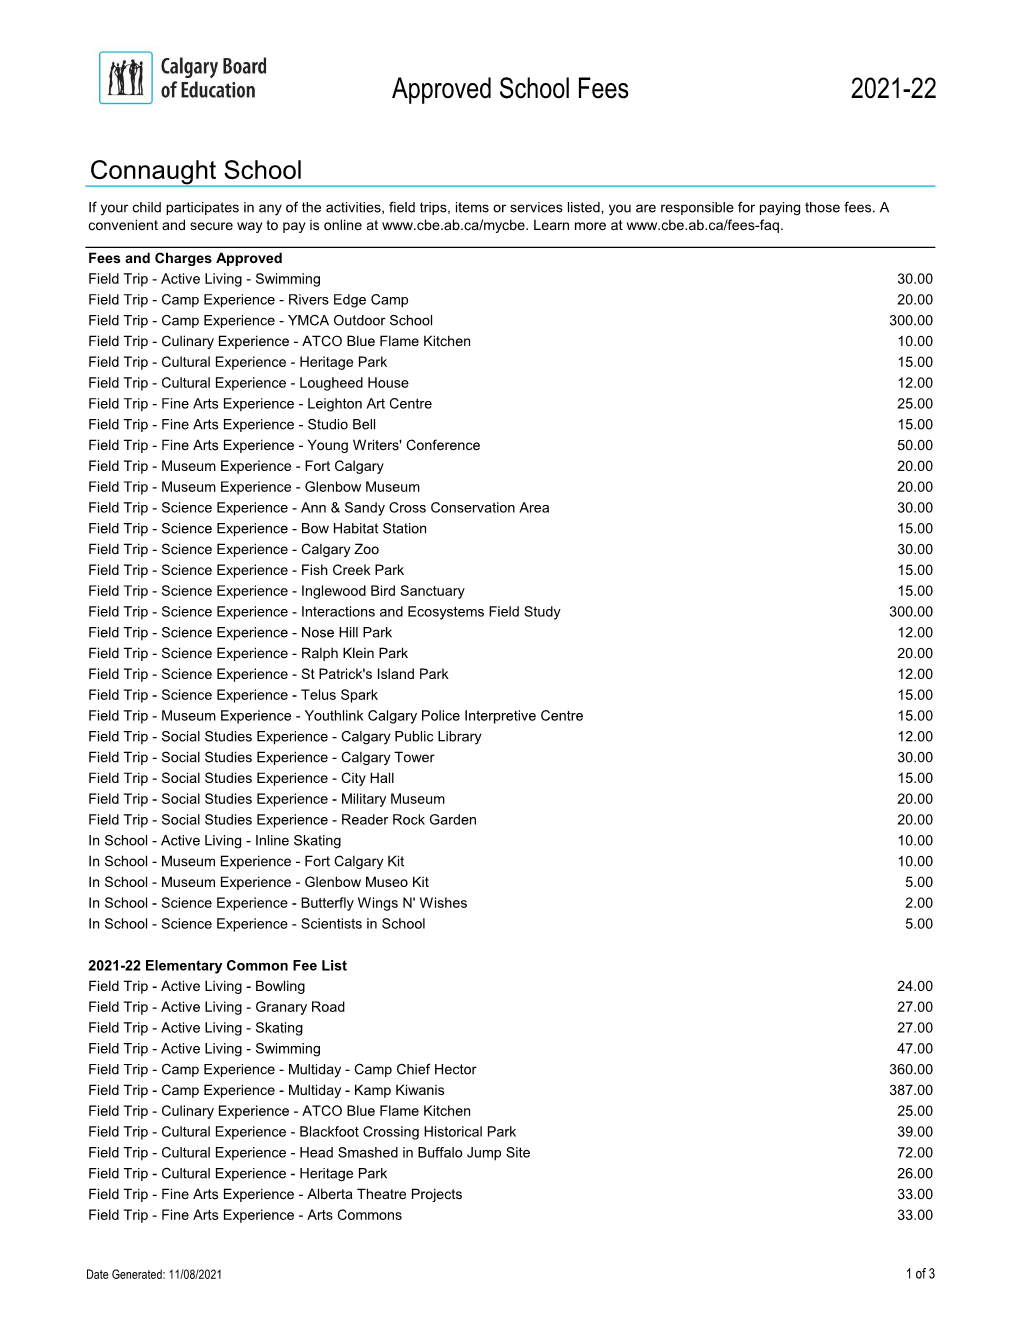 Connaught School | Approved Fees